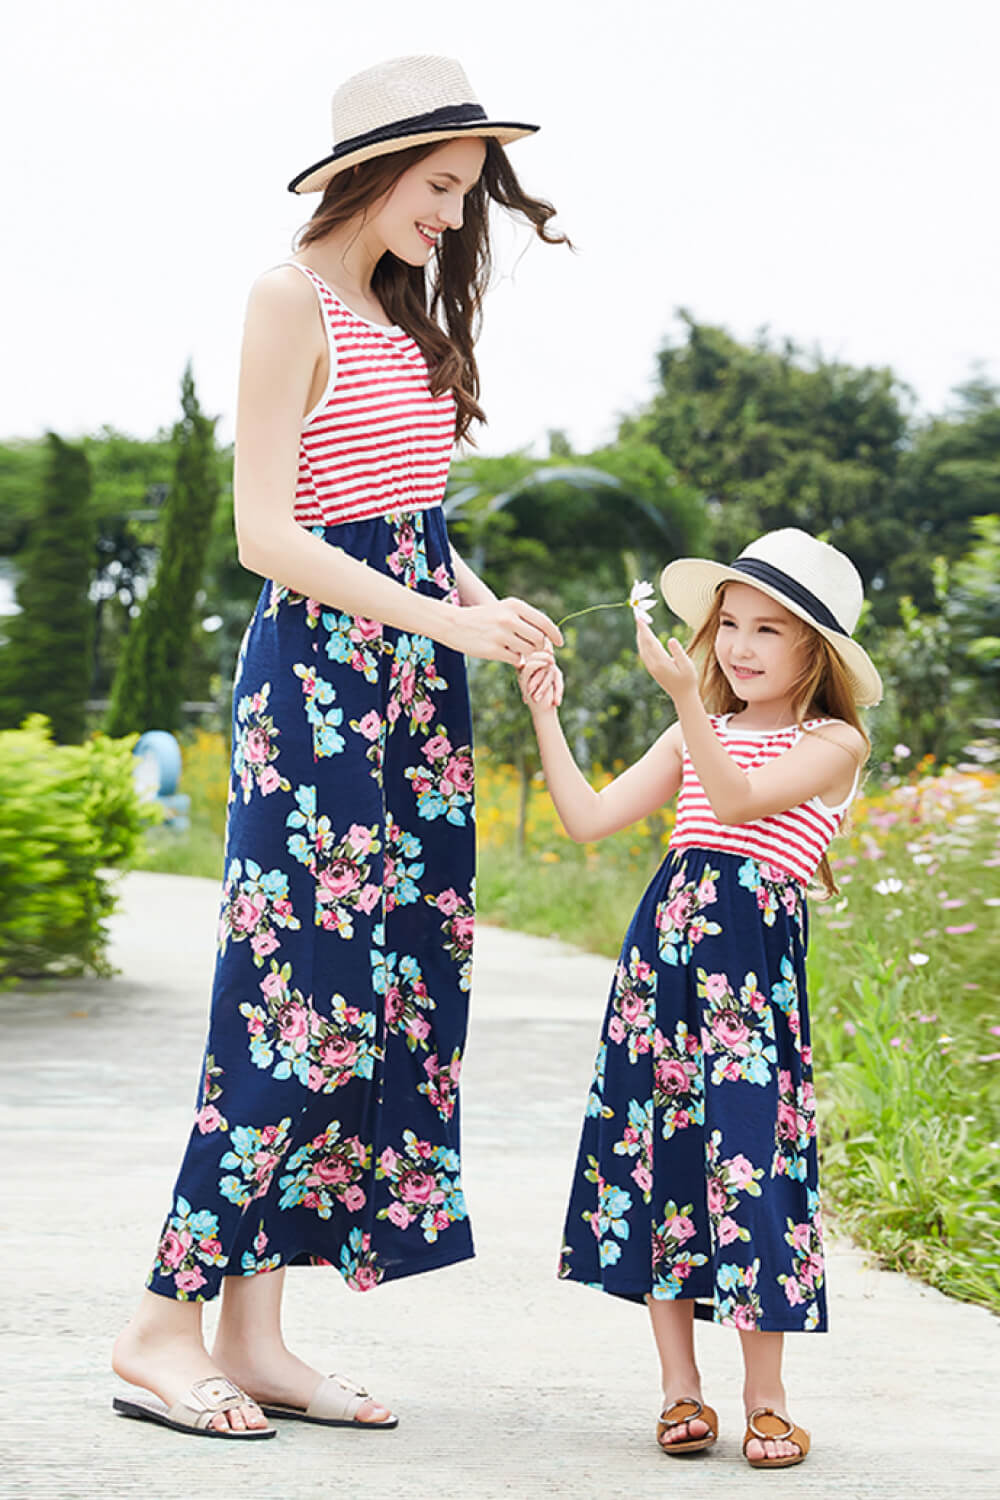 - Women Striped Floral Sleeveless Dress - Mommy & Me - womens dress at TFC&H Co.